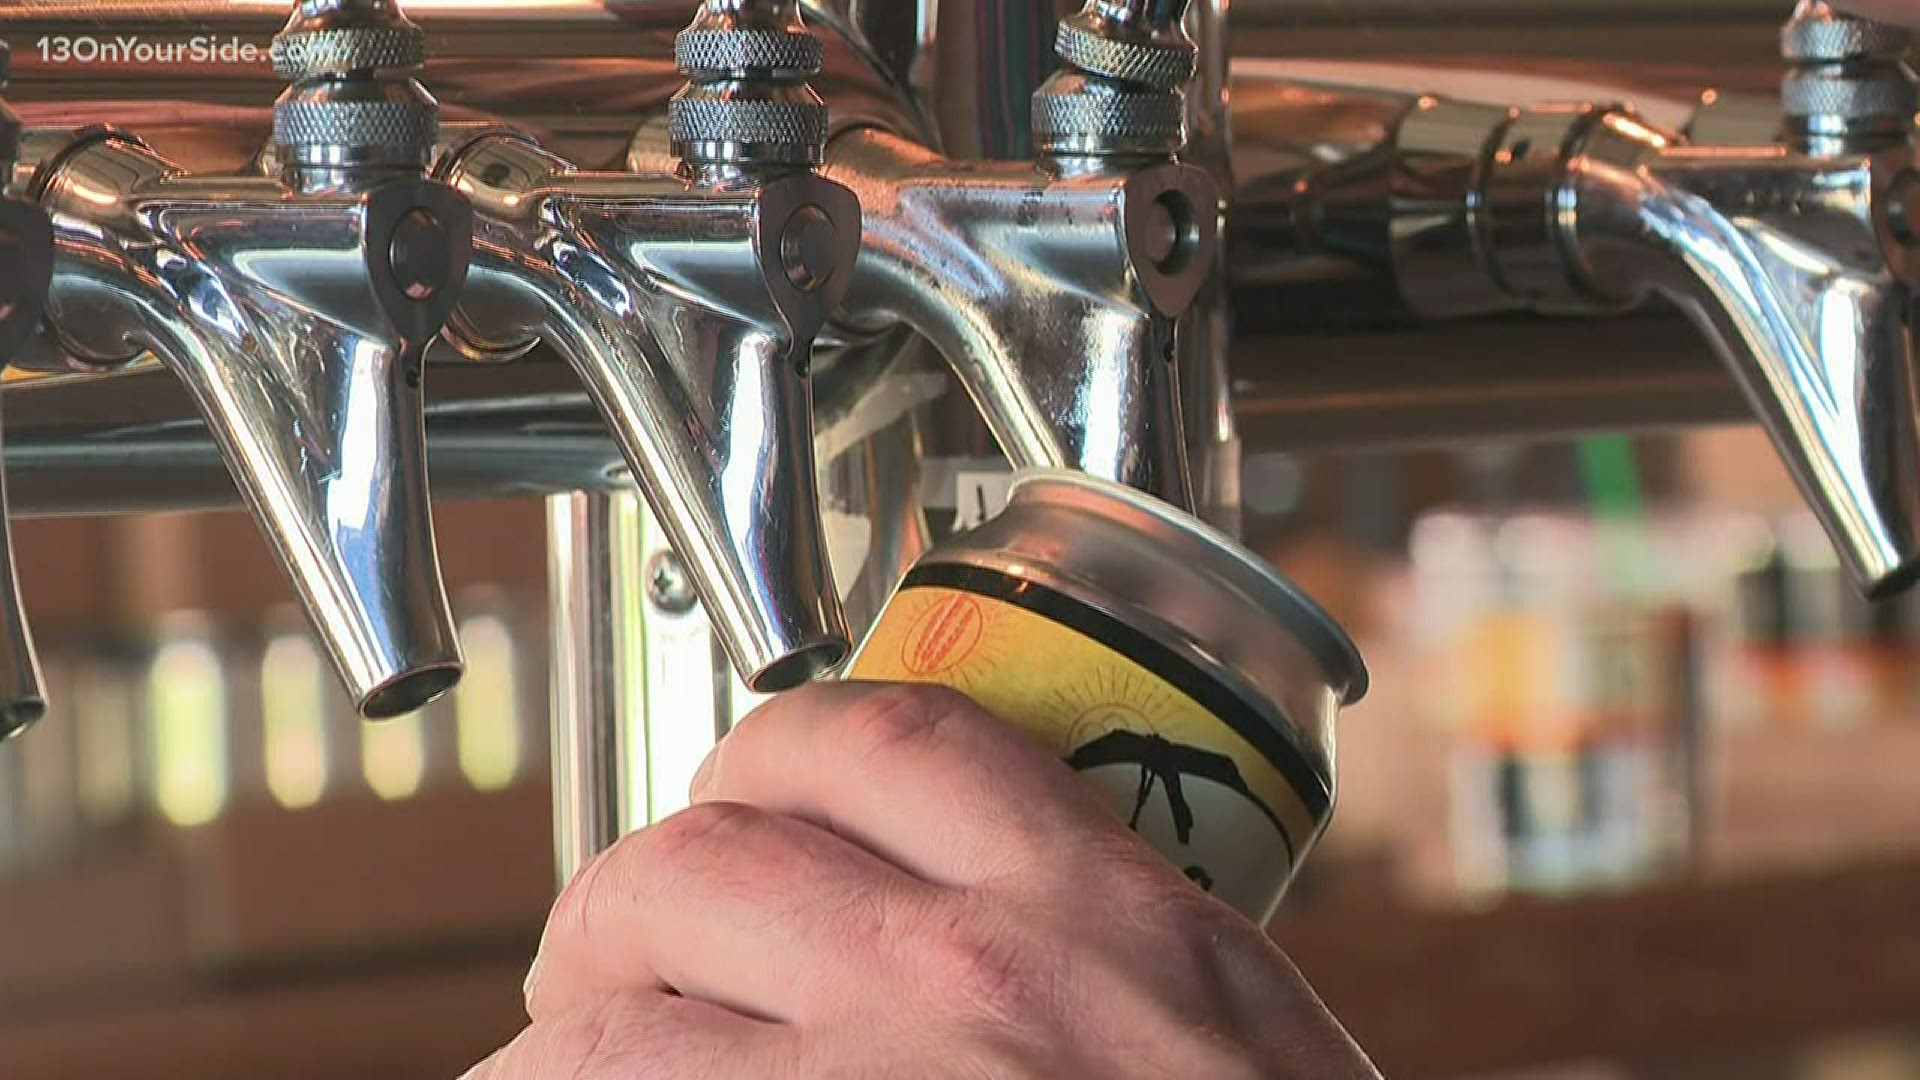 In a pandemic that's shuttered restaurants and cancelled summer festivals, expired beer is getting dumped, and small businesses are struggling to stay afloat.